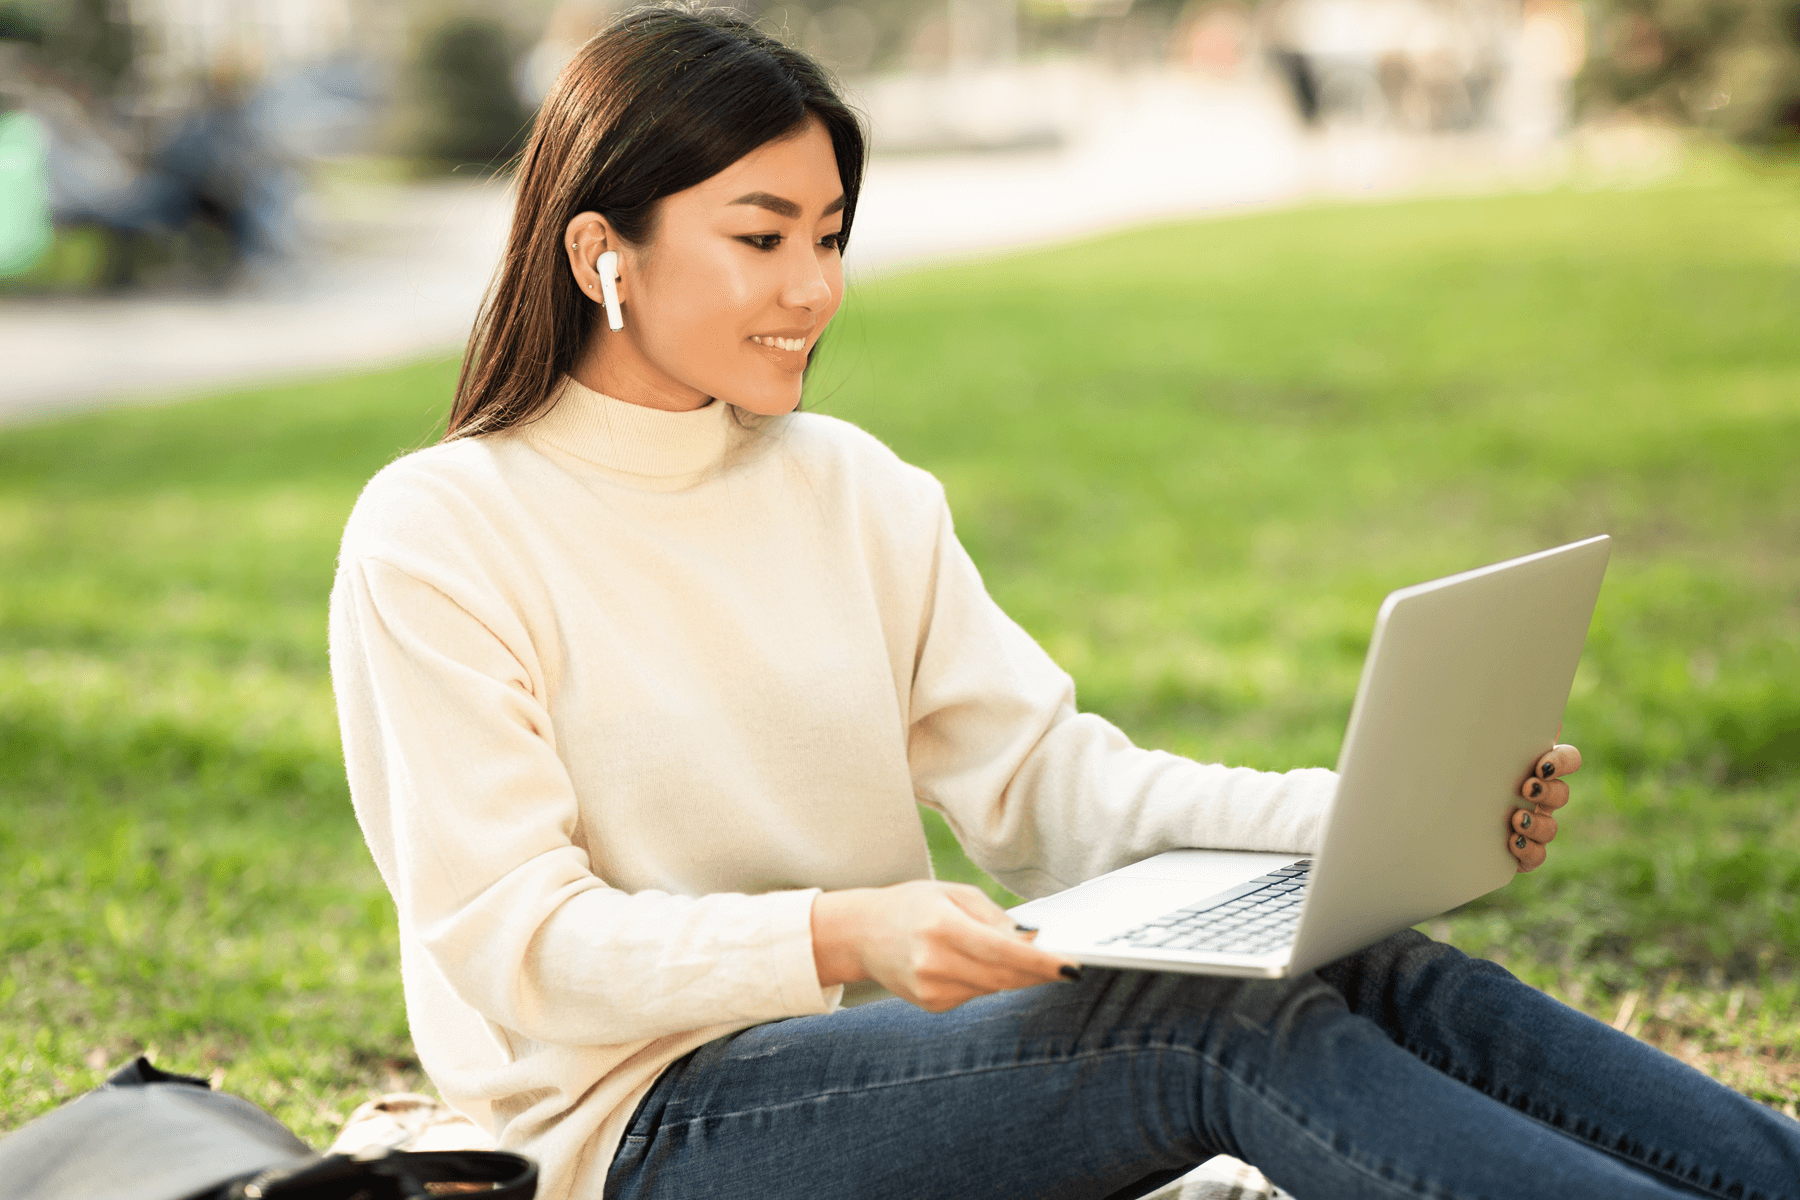 female student on laptop outside in grass with wireless earbuds for school